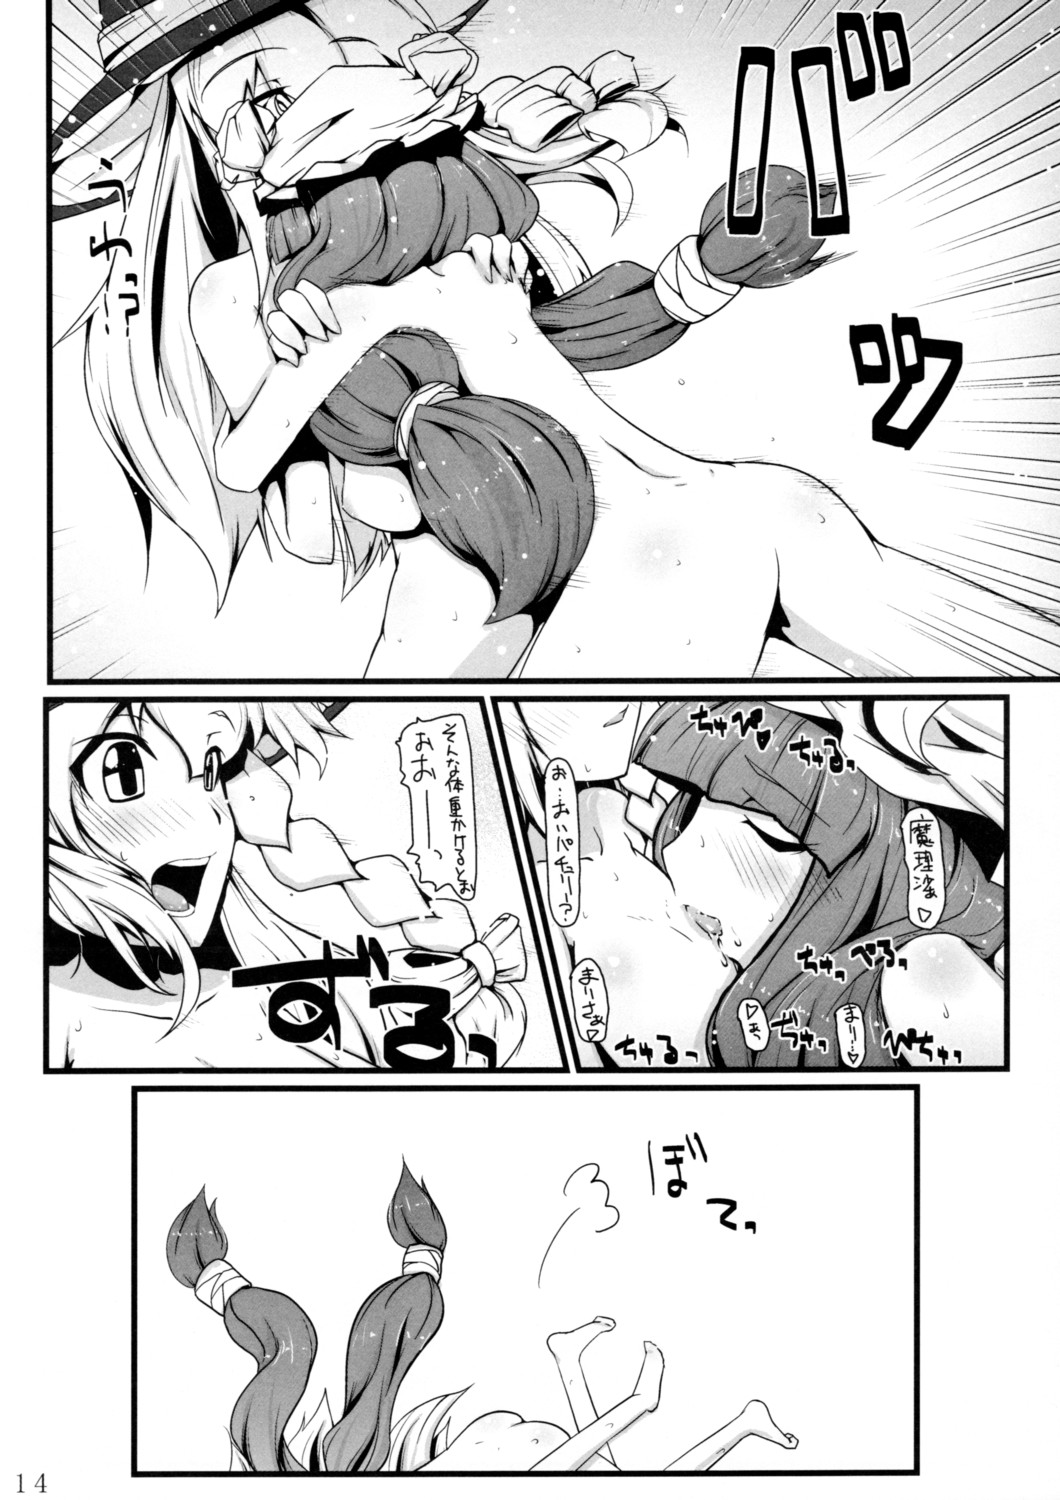 (Reitaisai 5) [Eclipse (Rougetu)] infinite loop (Touhou Project) page 14 full